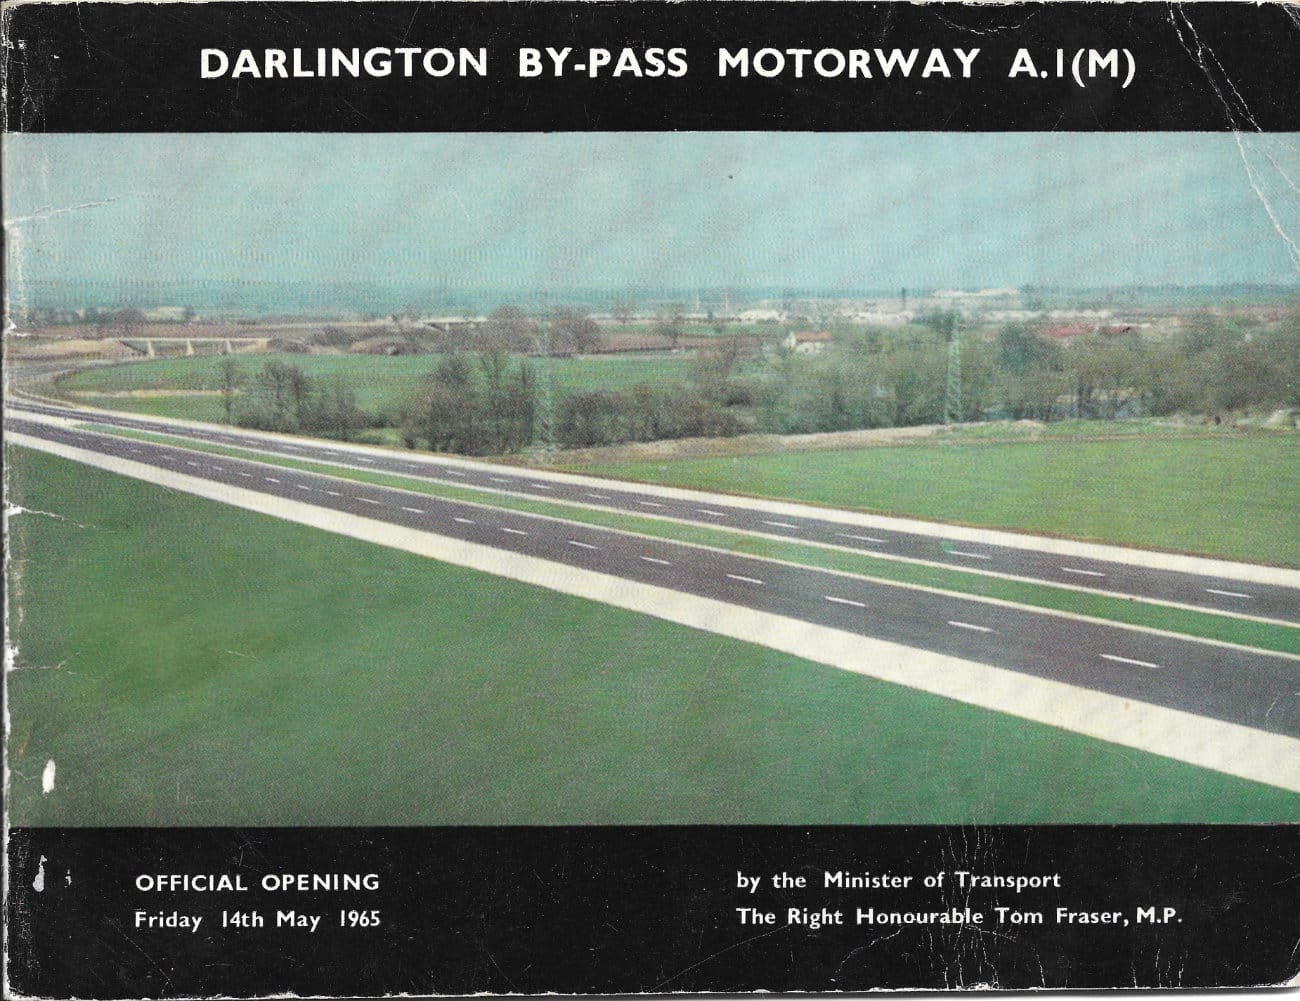 Booklet published to mark the opening of the A1(M) Darlington Bypass